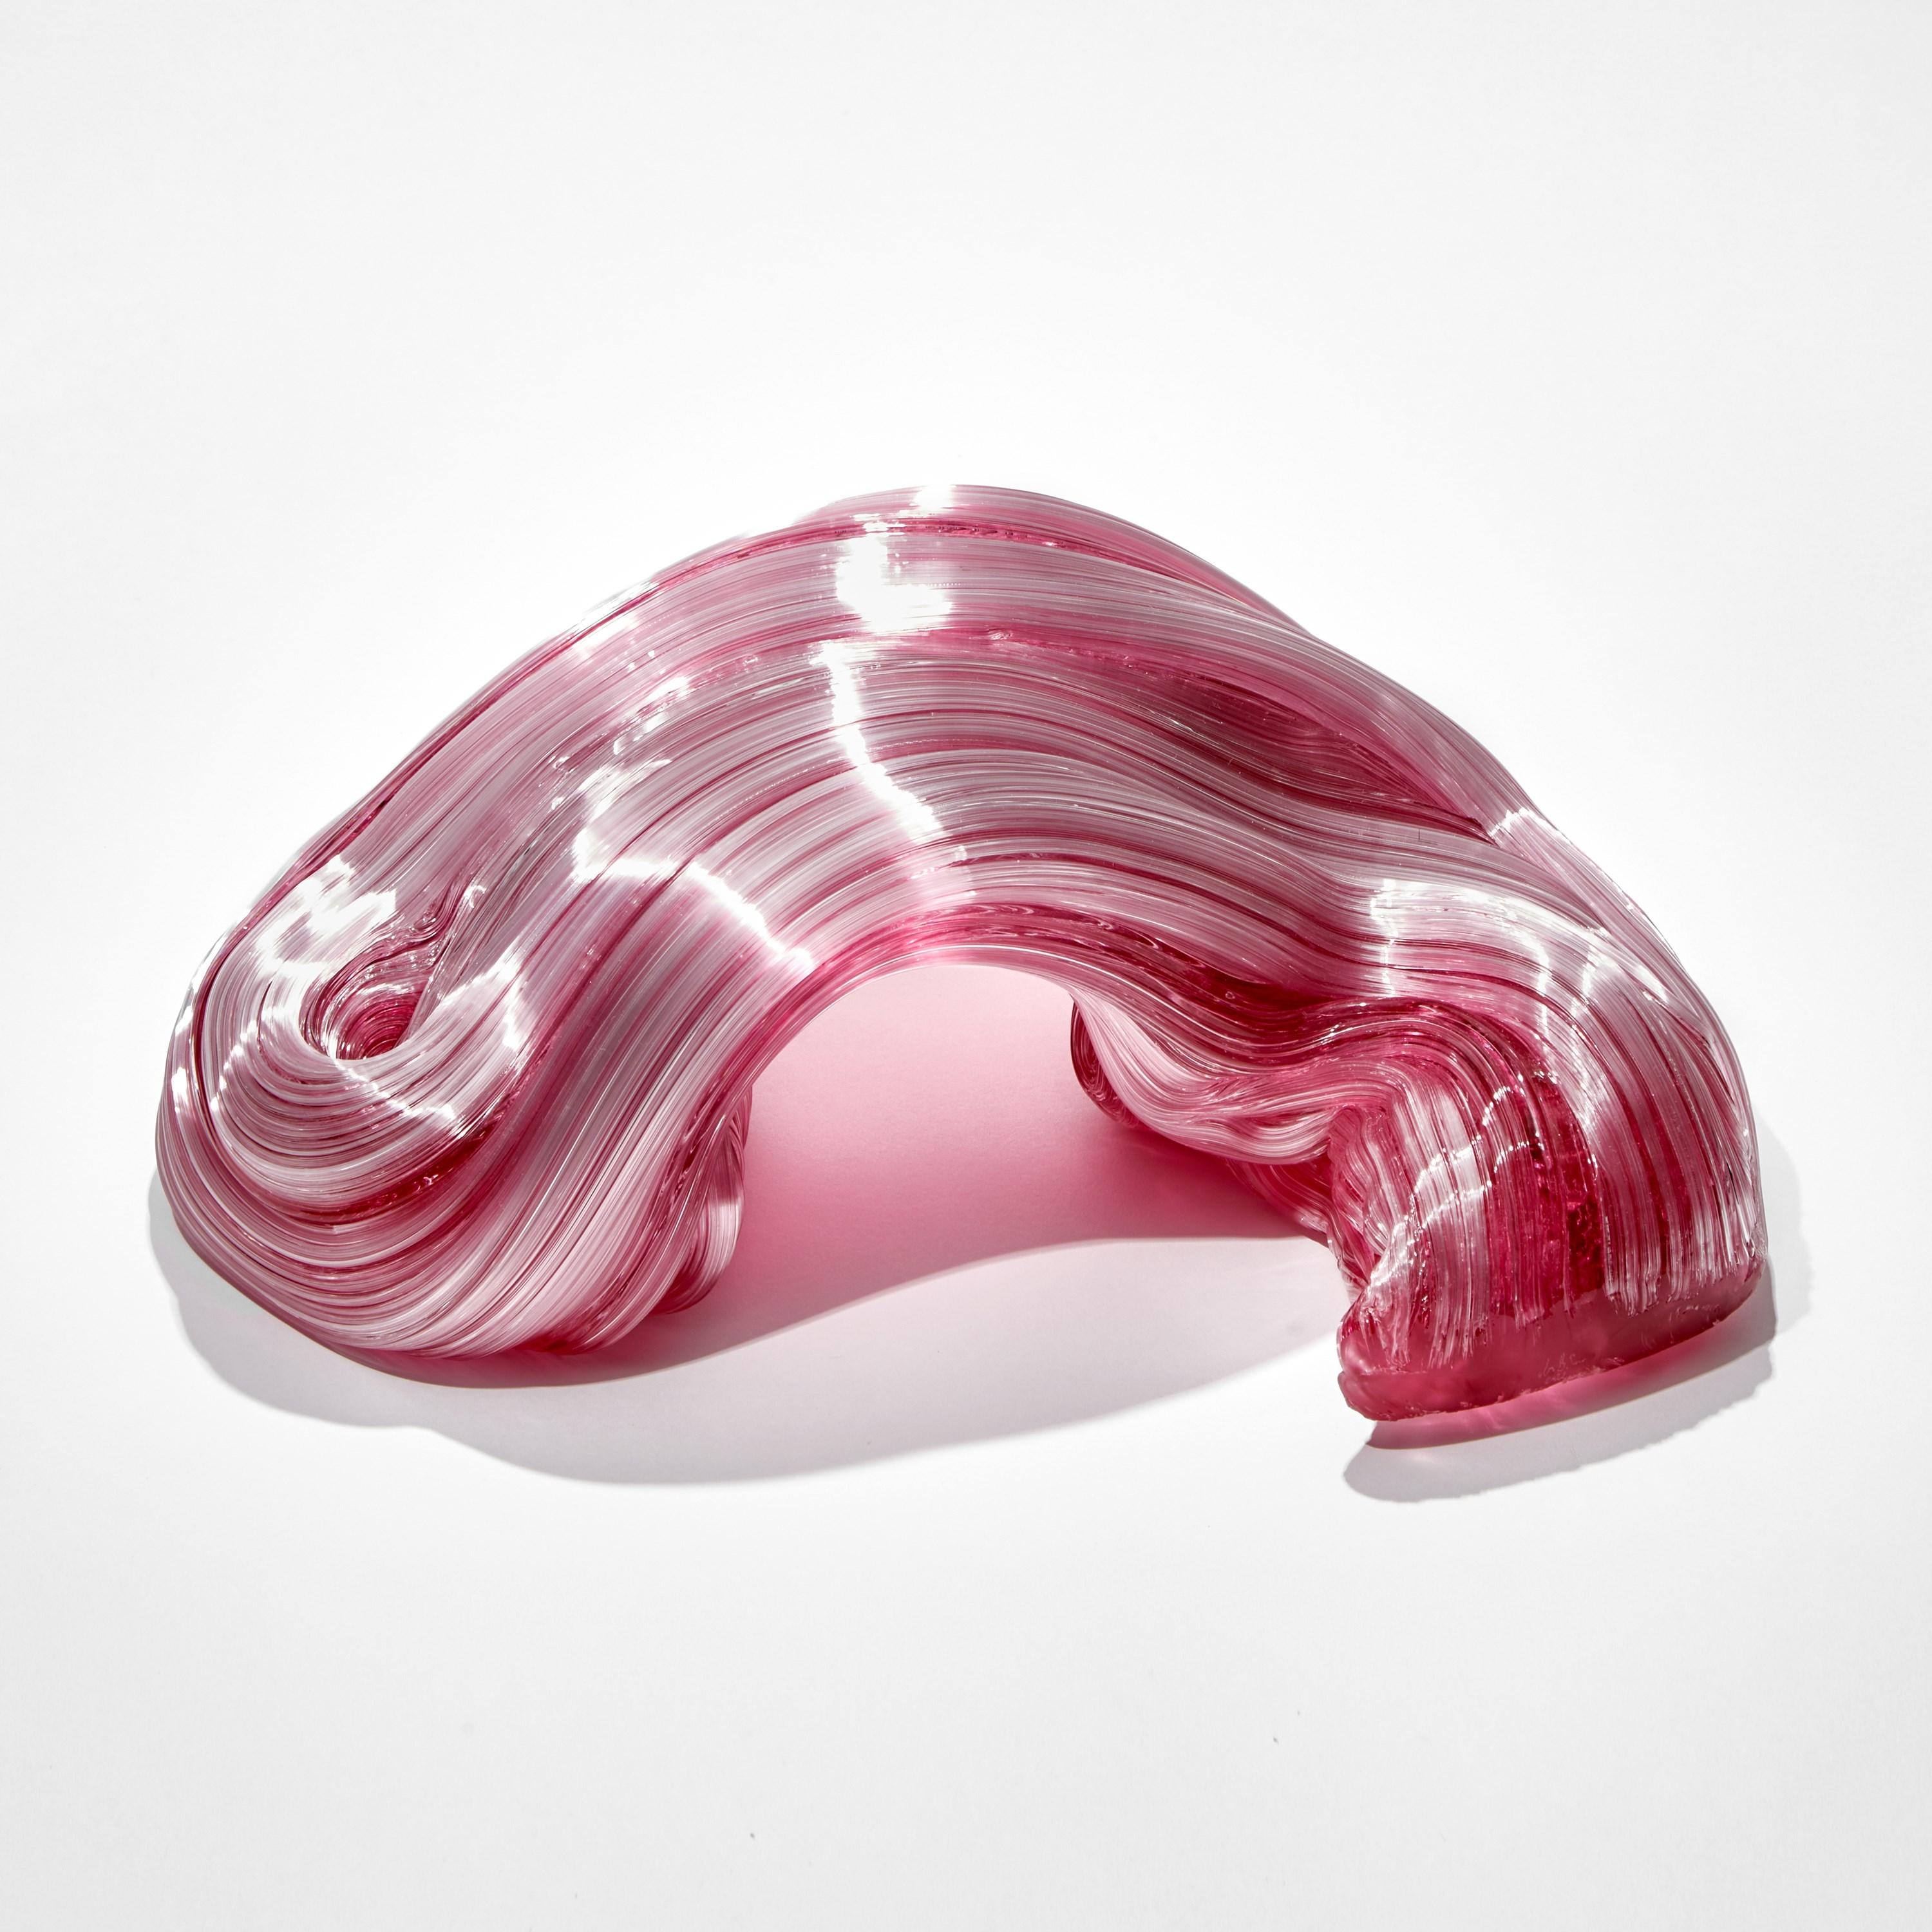 ‘Soft Lines in Pink' is a unique glass sculpture by the Danish artist, Maria Bang Espersen.

Maria Bang Espersen works around the idea that all things are malleable, like glass, and that nothing can be permanently defined. Her experimental